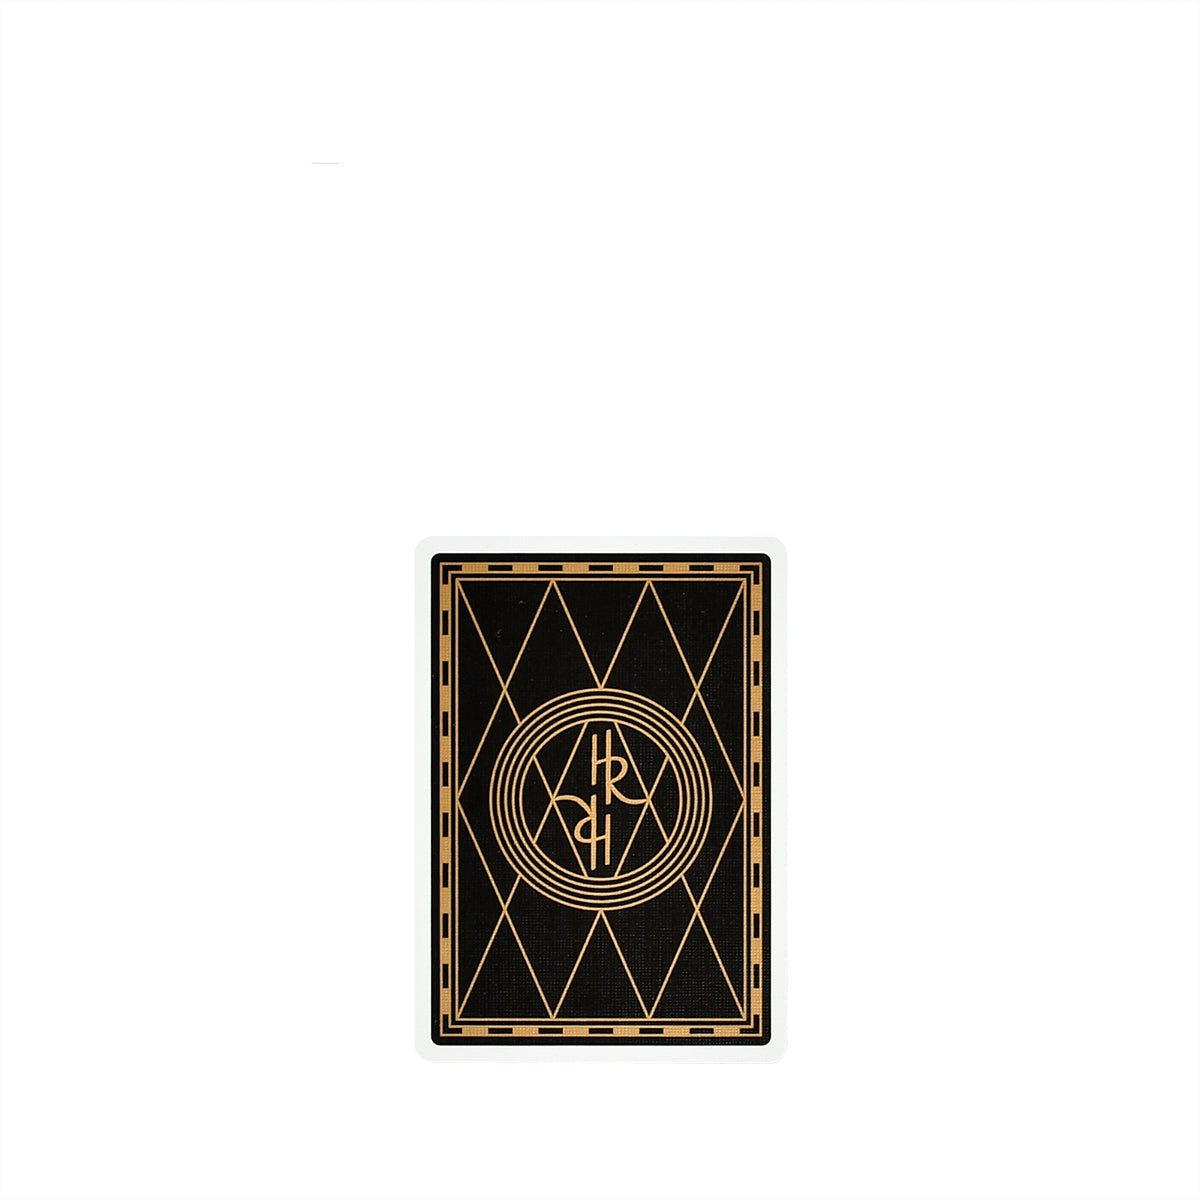 THEORY 11 - PLAYING CARDS - HOLLYWOOD ROOSEVELT